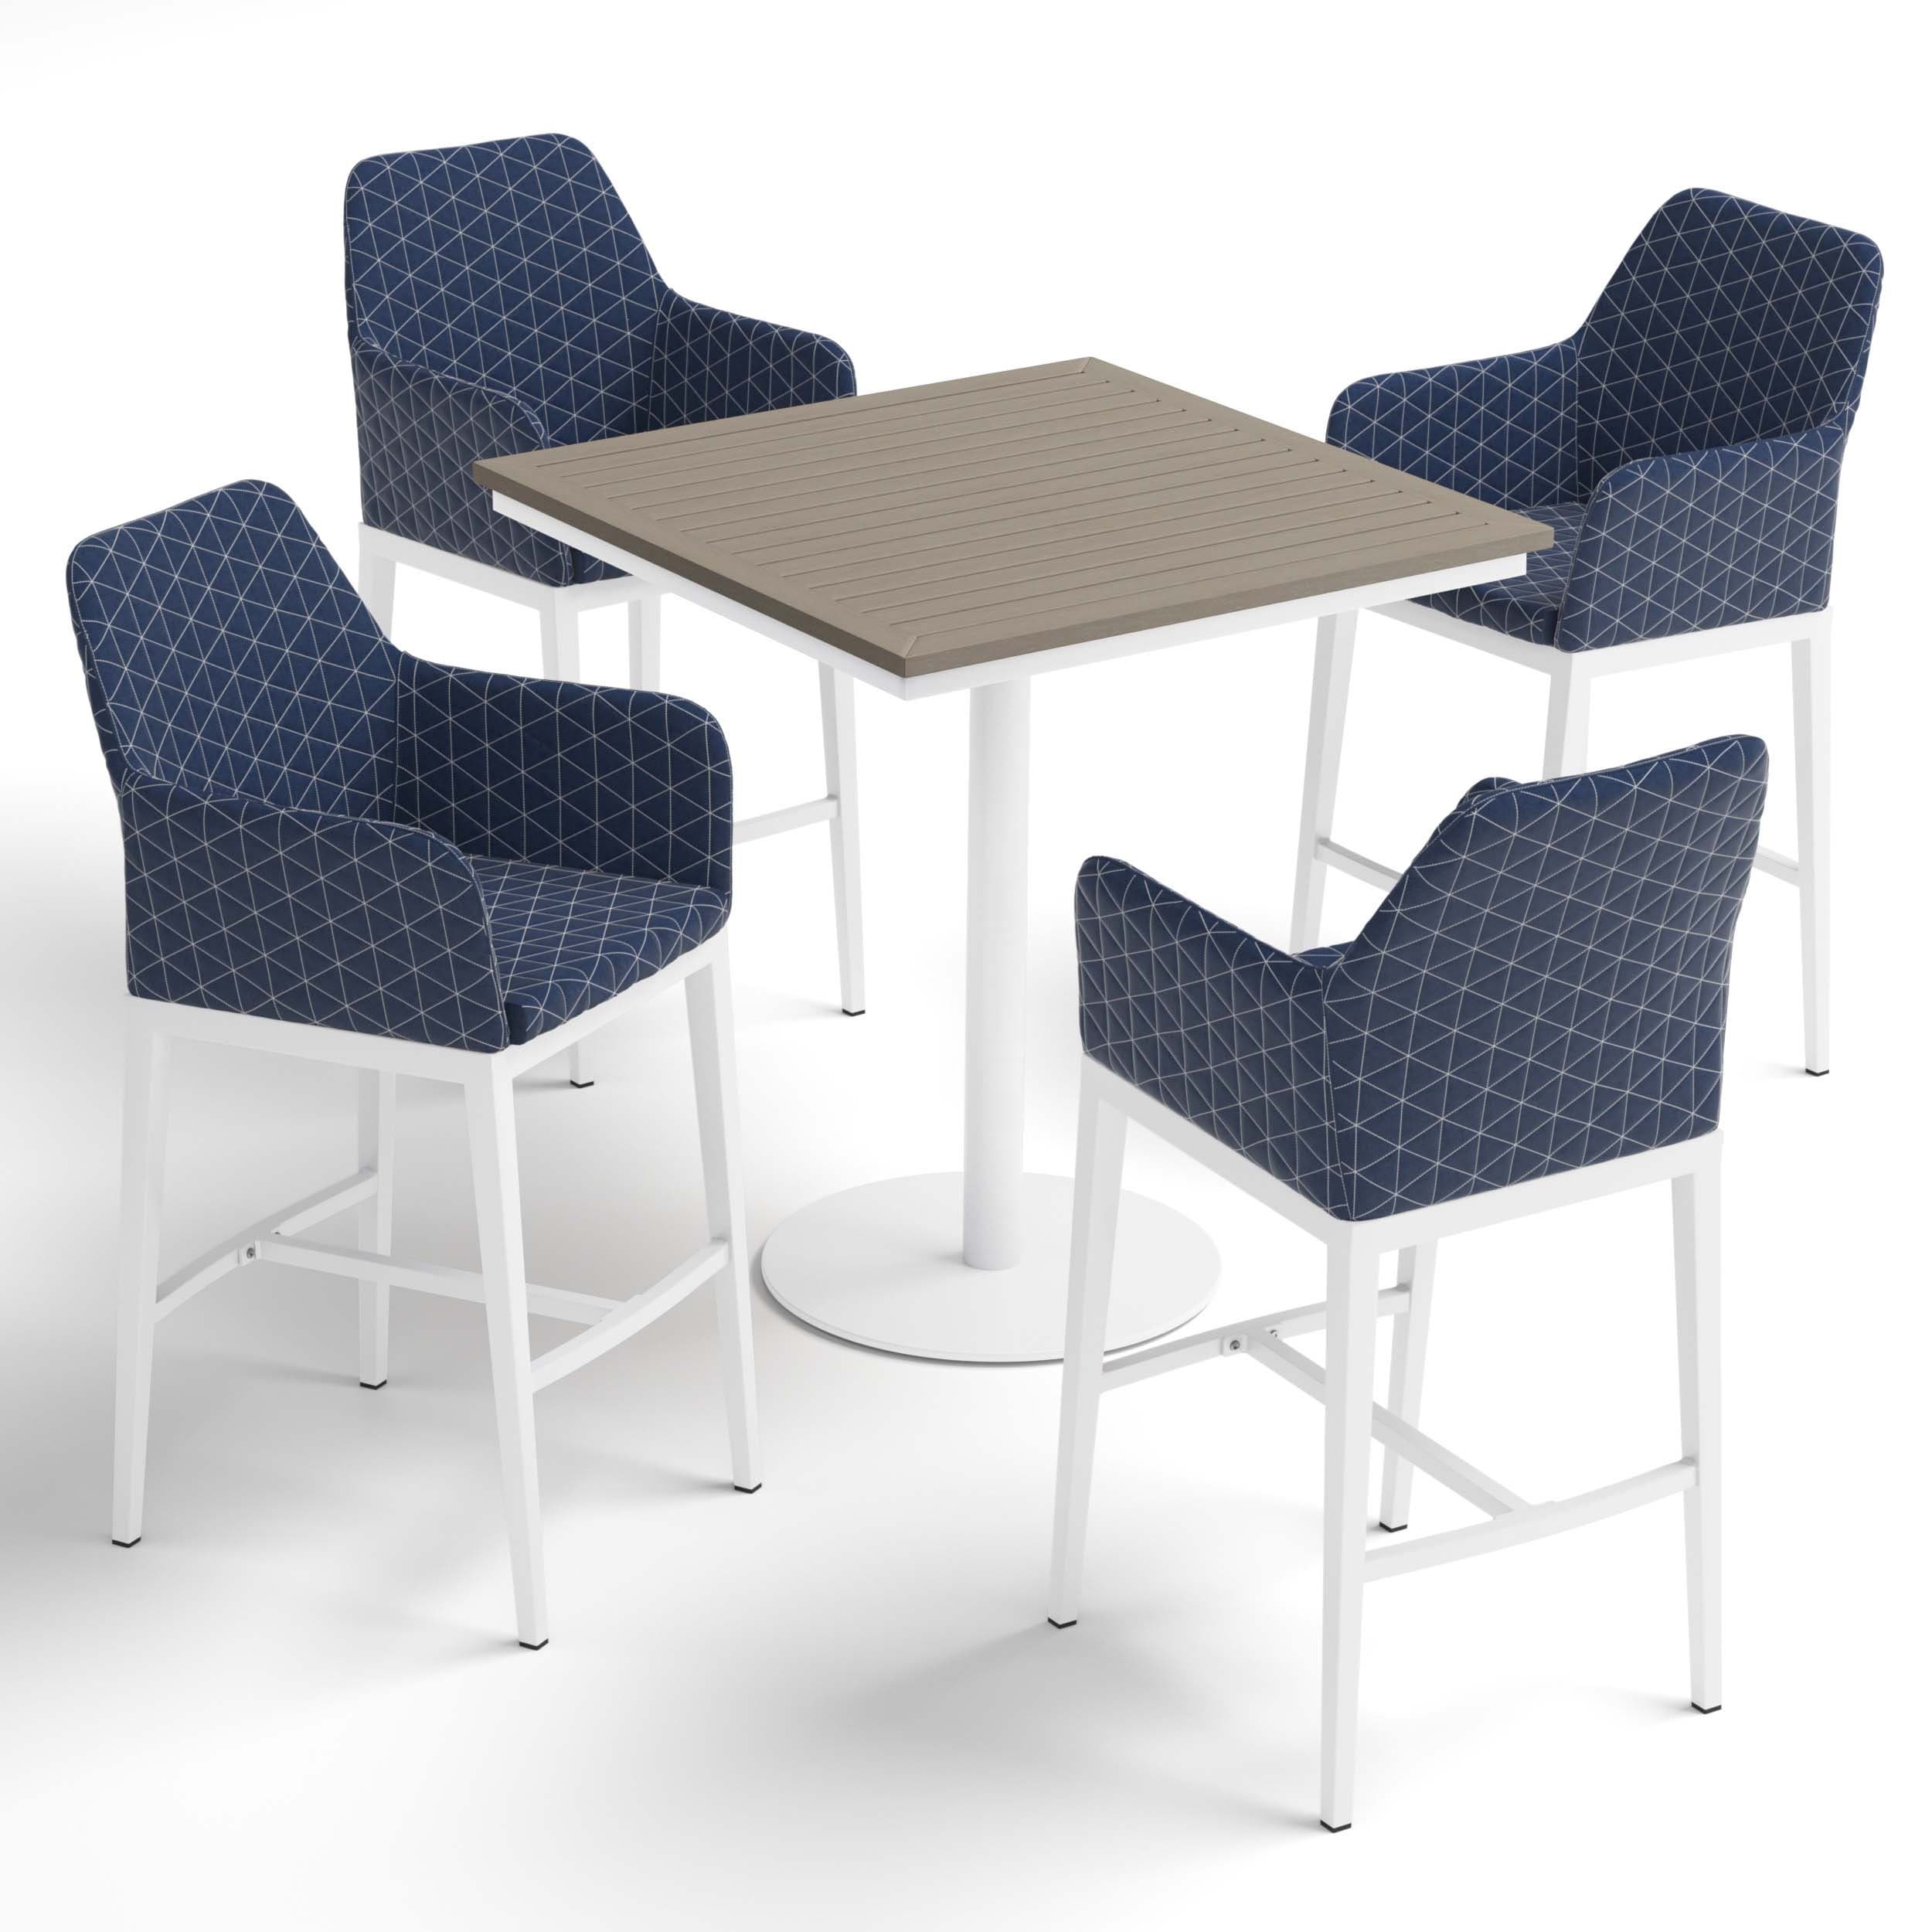 Travira 5-piece 36 Square Bar Table And Oland Bar Chairs Set